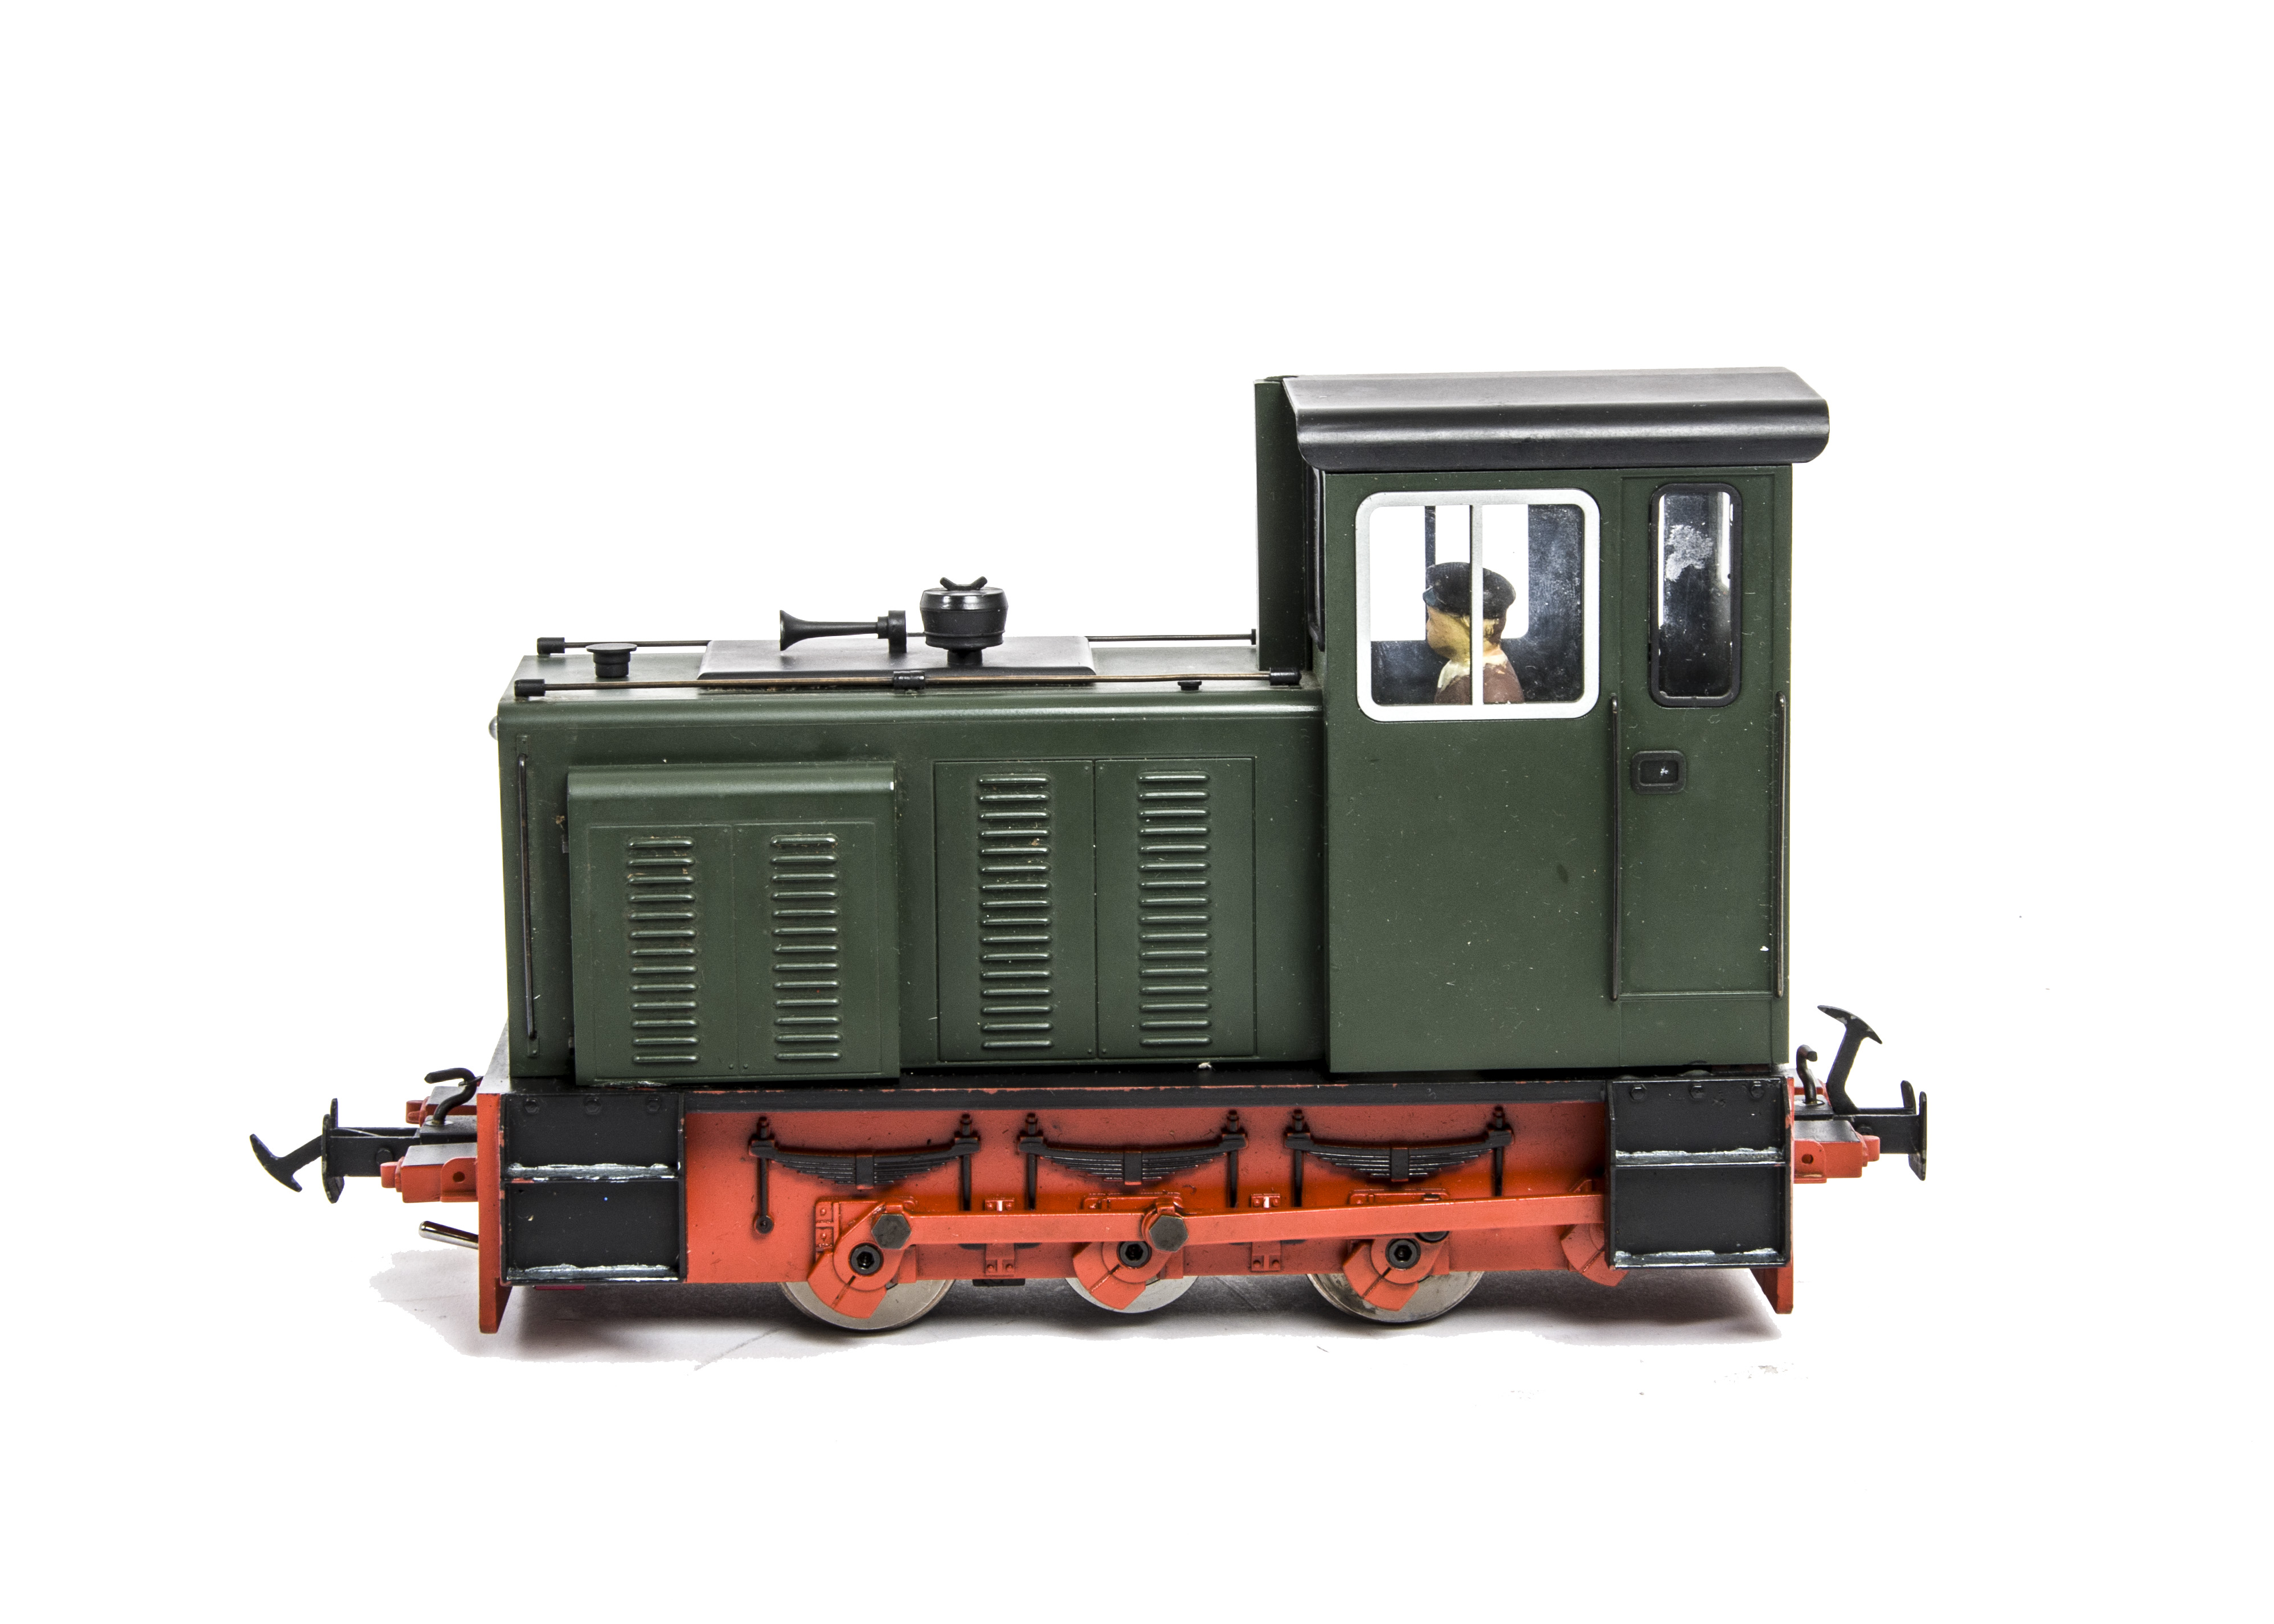 A Gauge O/1 Convertible Narrow Gauge Drewry Diesel Locomotive by Accucraft, for radio-controlled